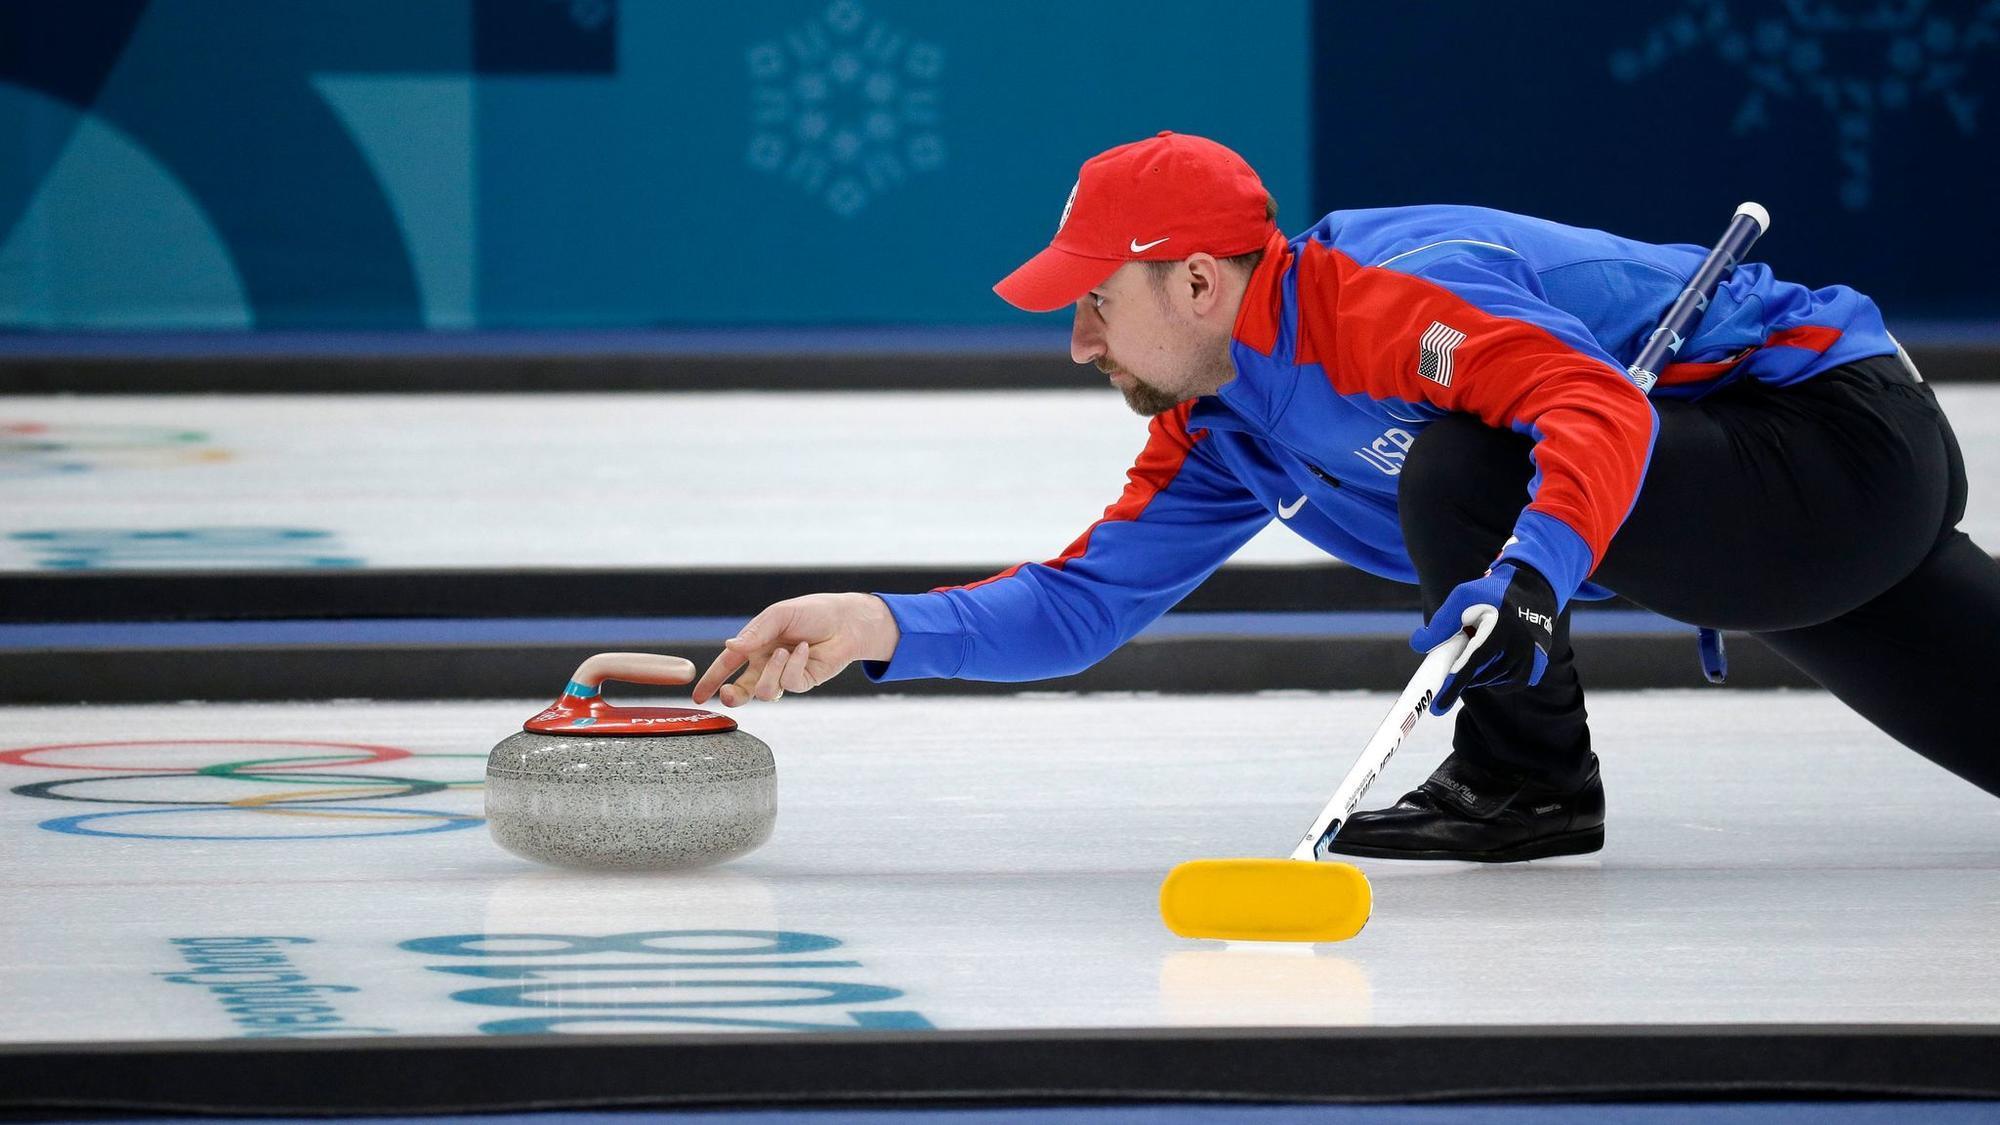 Olympic TV highlights for Thursday: Start your day with a U.S. curling semifinal